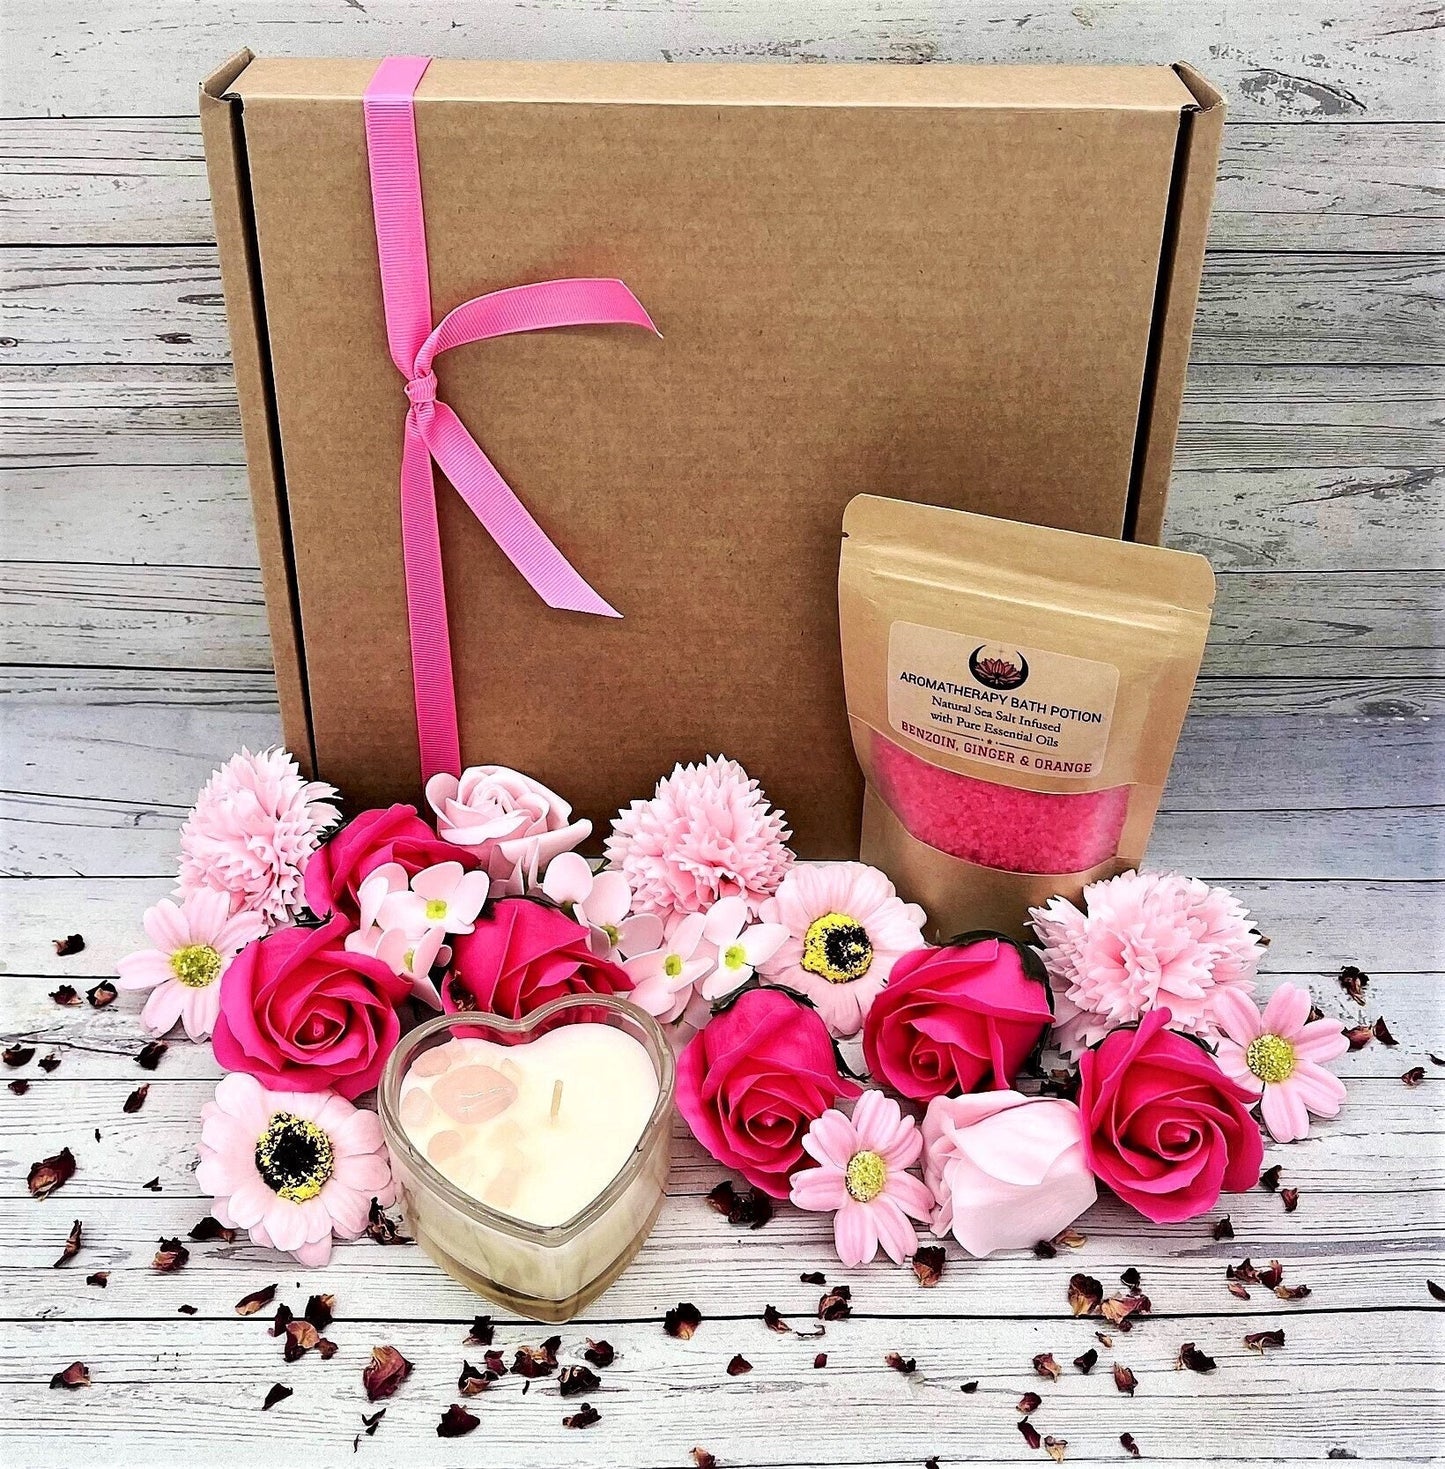 THE BLOOMING PINK Luxury Spa Flowers Gift Box, Pink Quartz Candle, Aromatherapy Bath Salts, Bouquet, Self Care,Wellness,Birthday, Thank You,